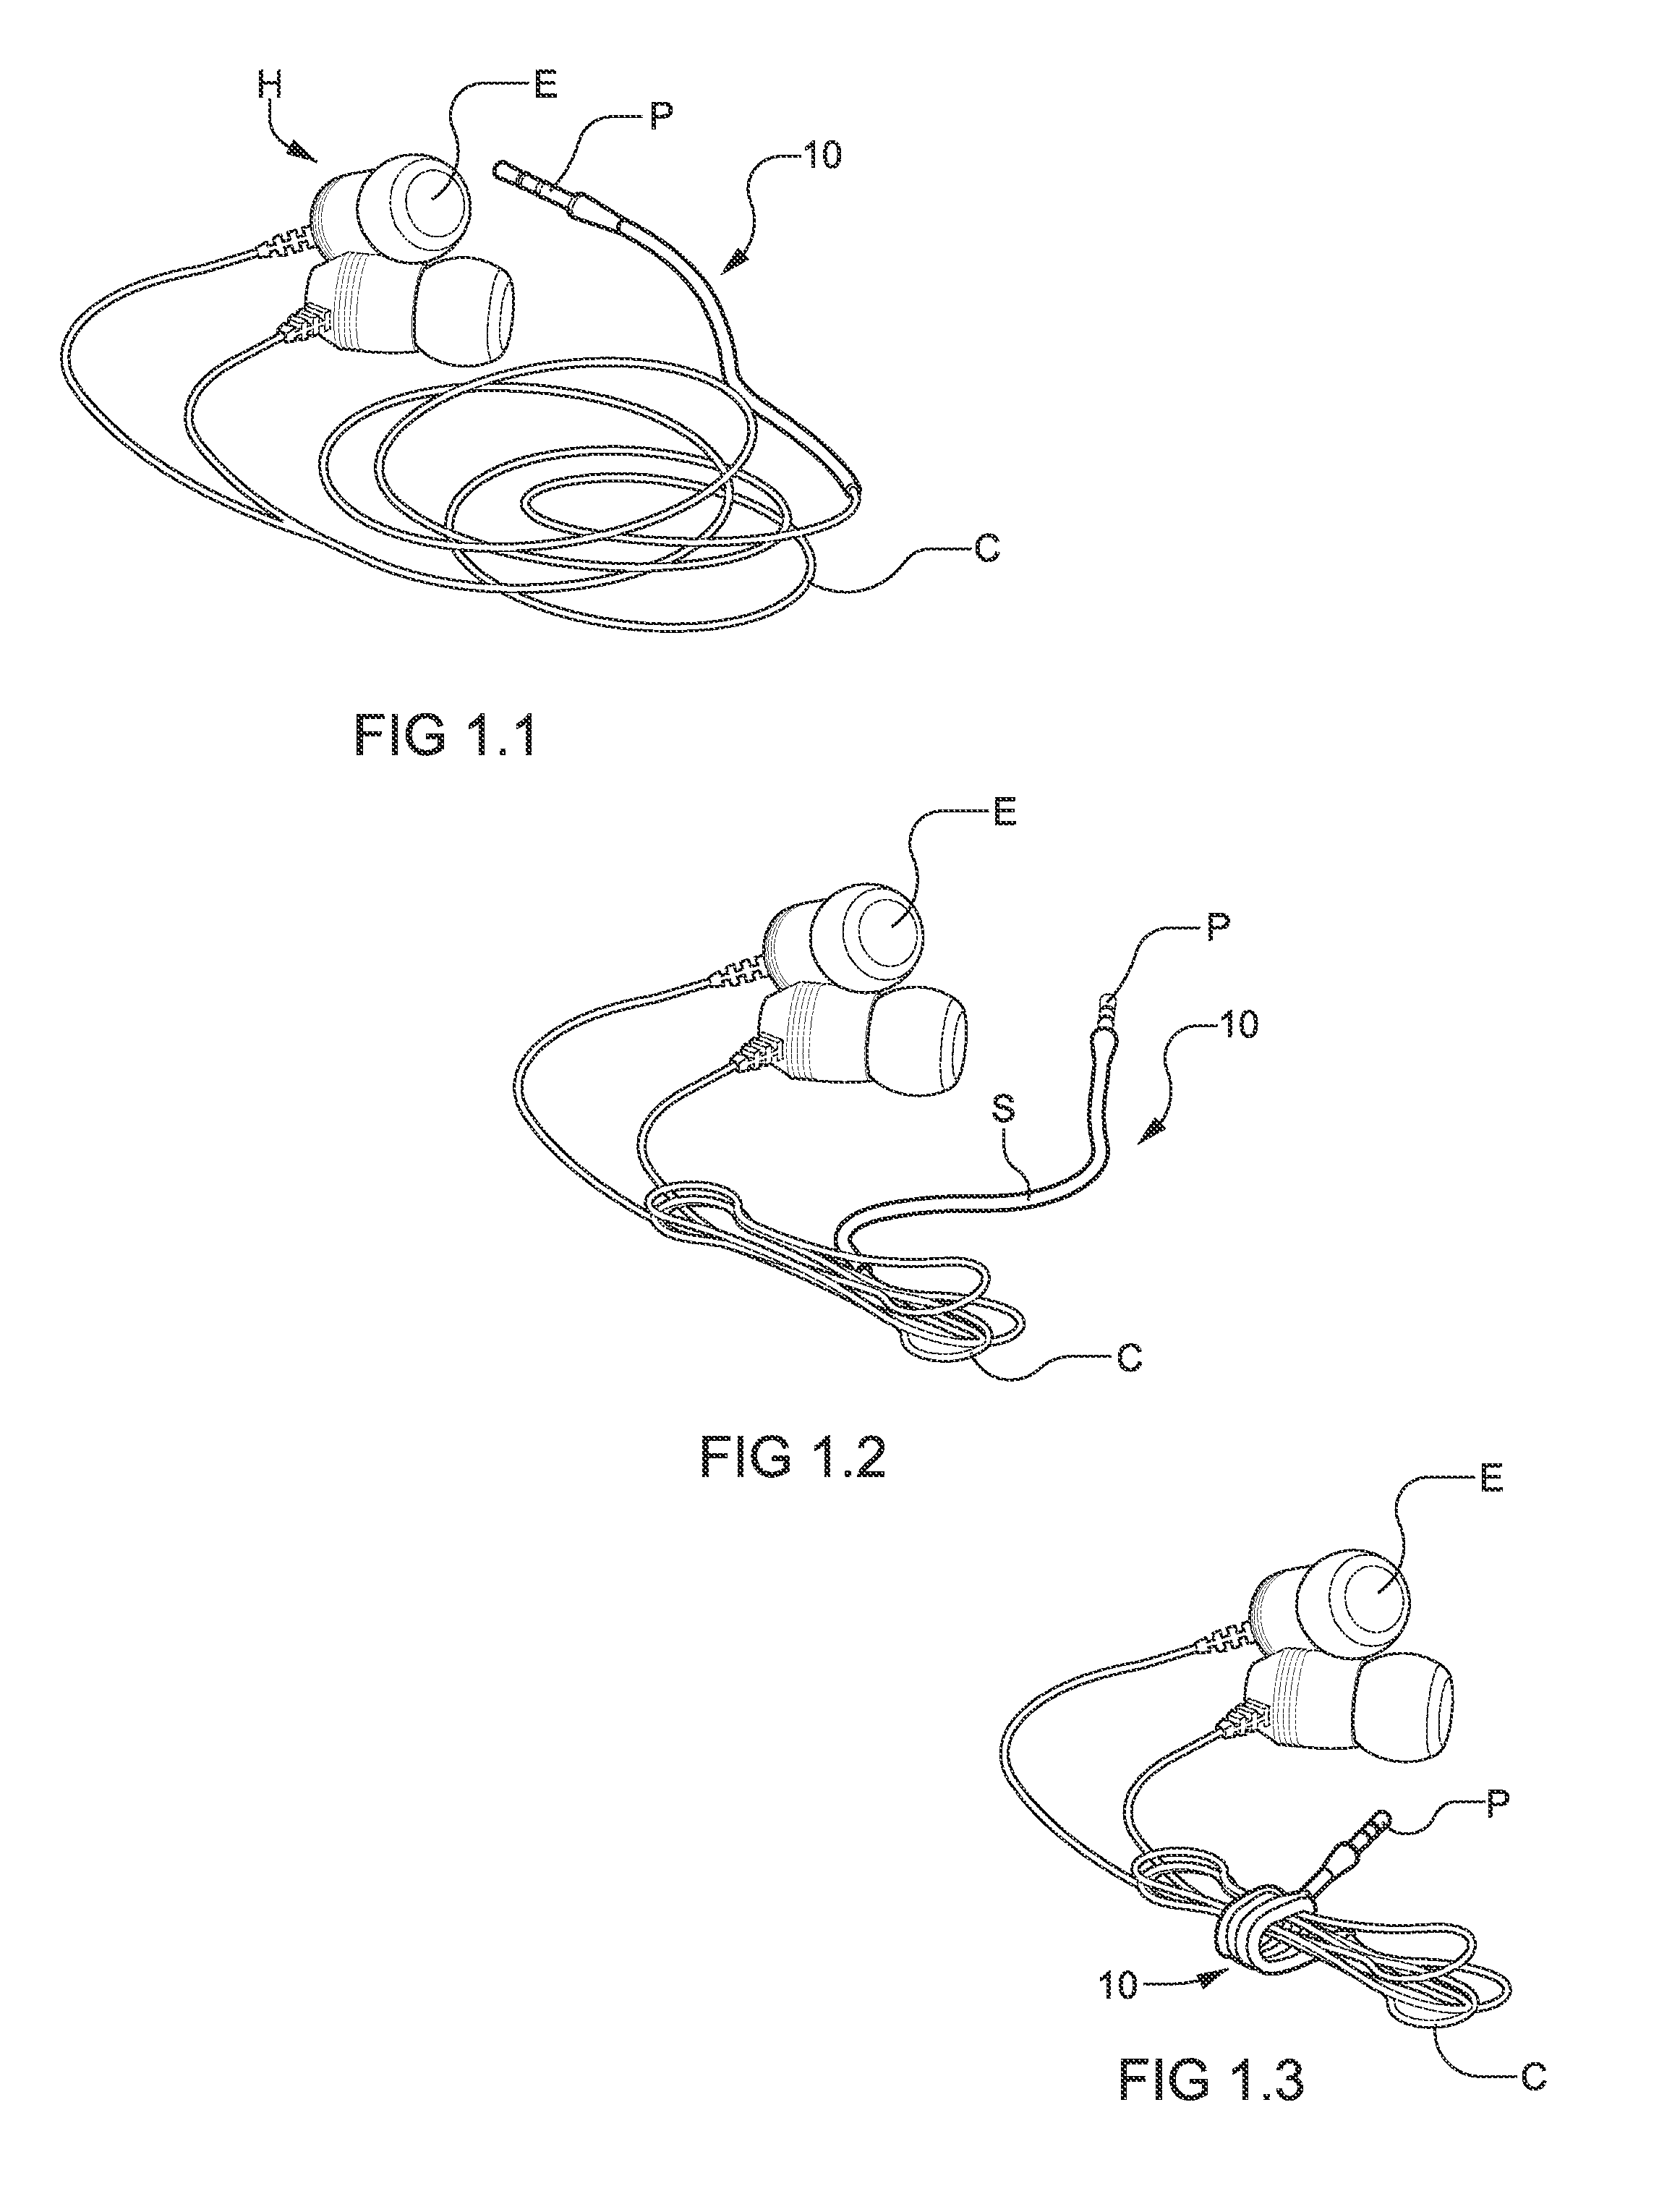 Cable management system and method of use